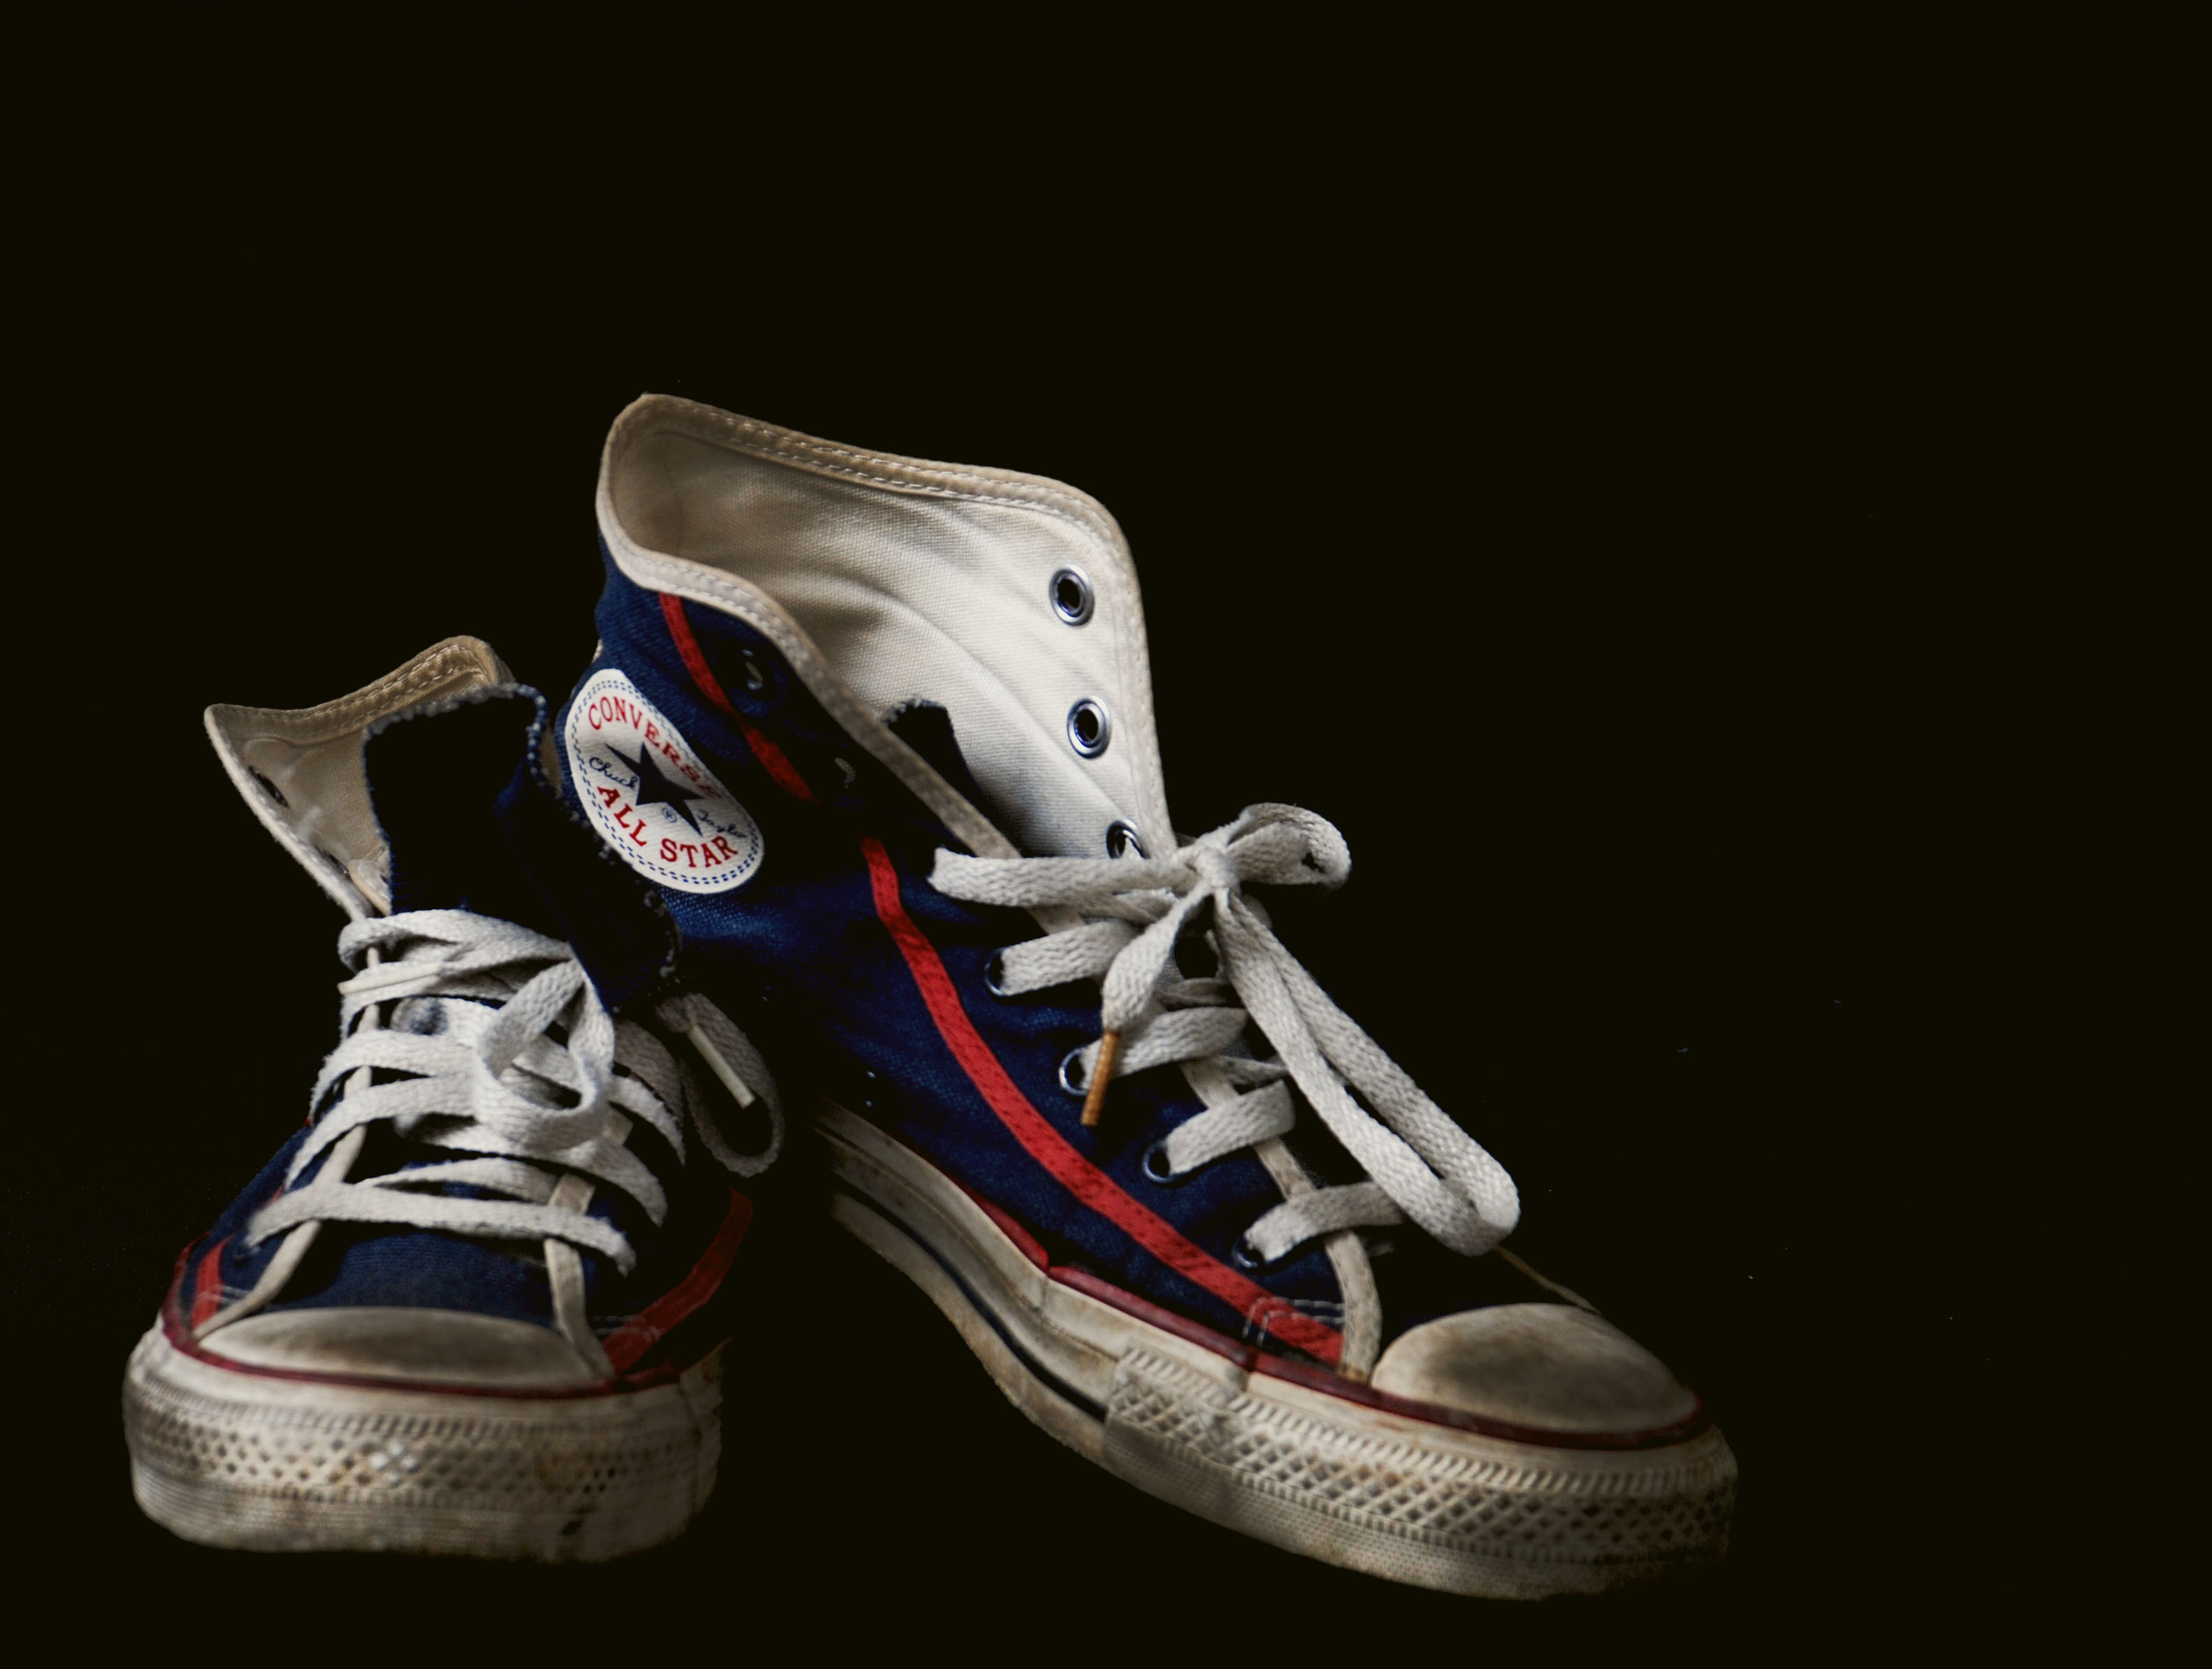 Lonely Converse Shoes Wallpapers And Images Wallpapers HD Wallpapers Download Free Images Wallpaper [wallpaper981.blogspot.com]